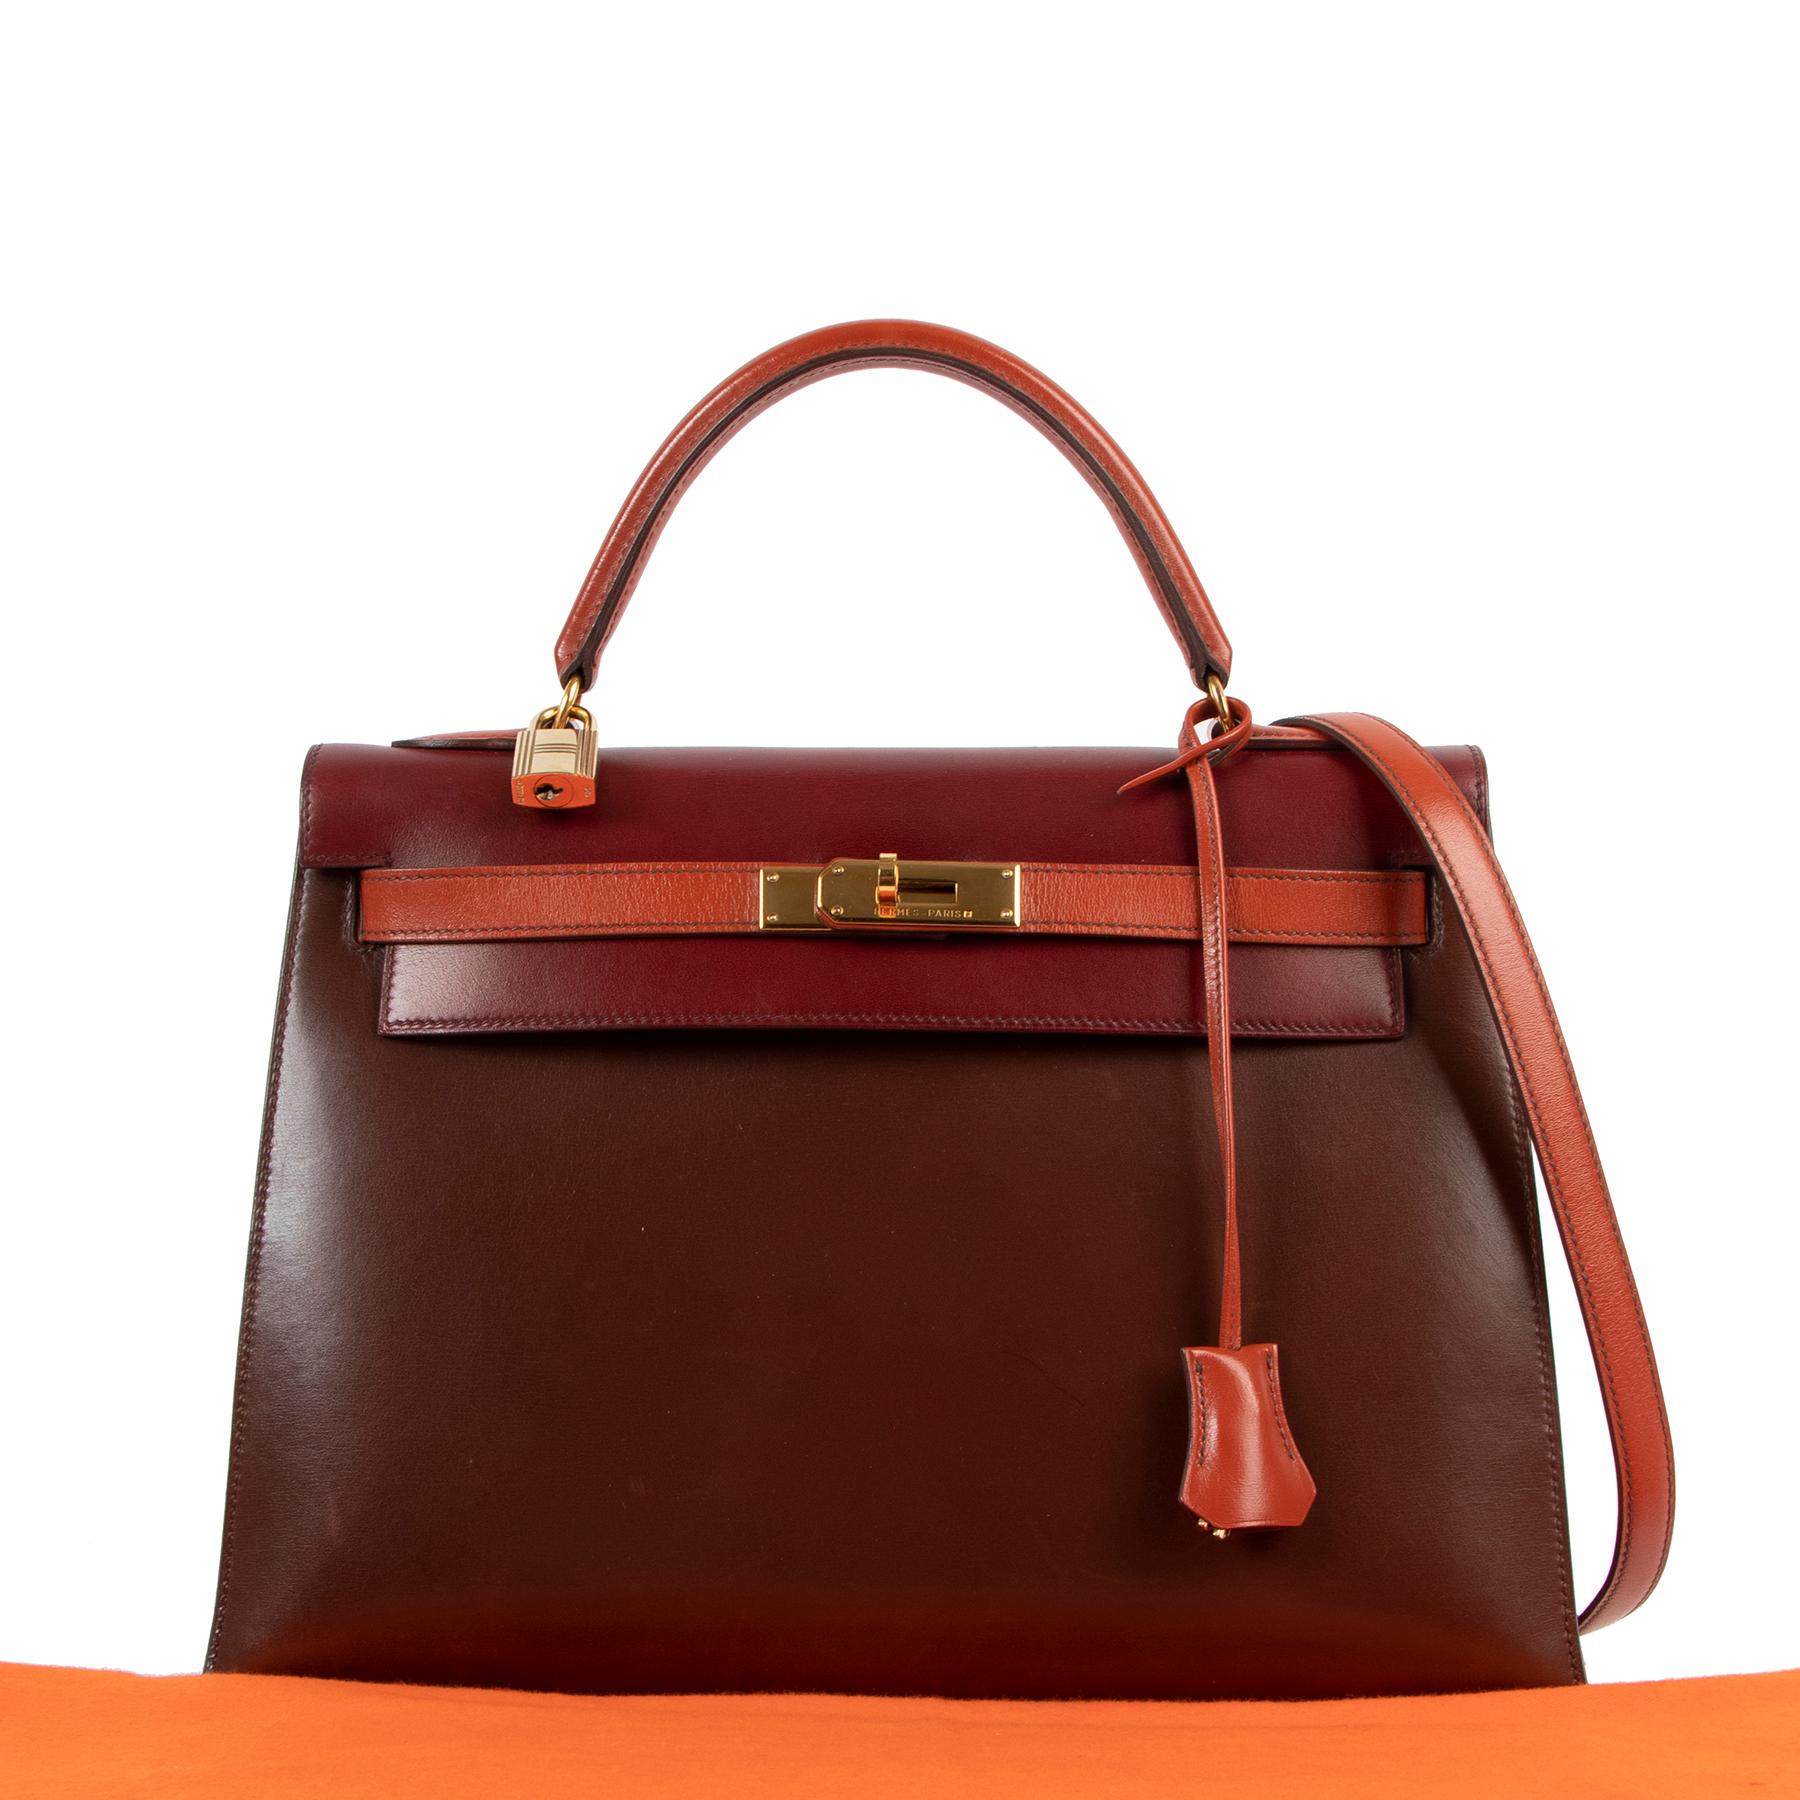 Hermès Kelly 32 Sellier Box Tri-colour Gold Hardware Limited Edition

Triple the colour, triple the fun! Hermès Tri-colour Kelly 32 is special in so many ways.

Crafted from glossy Box calfskin, this Hermès Kelly 32 Sellier has the structured shape